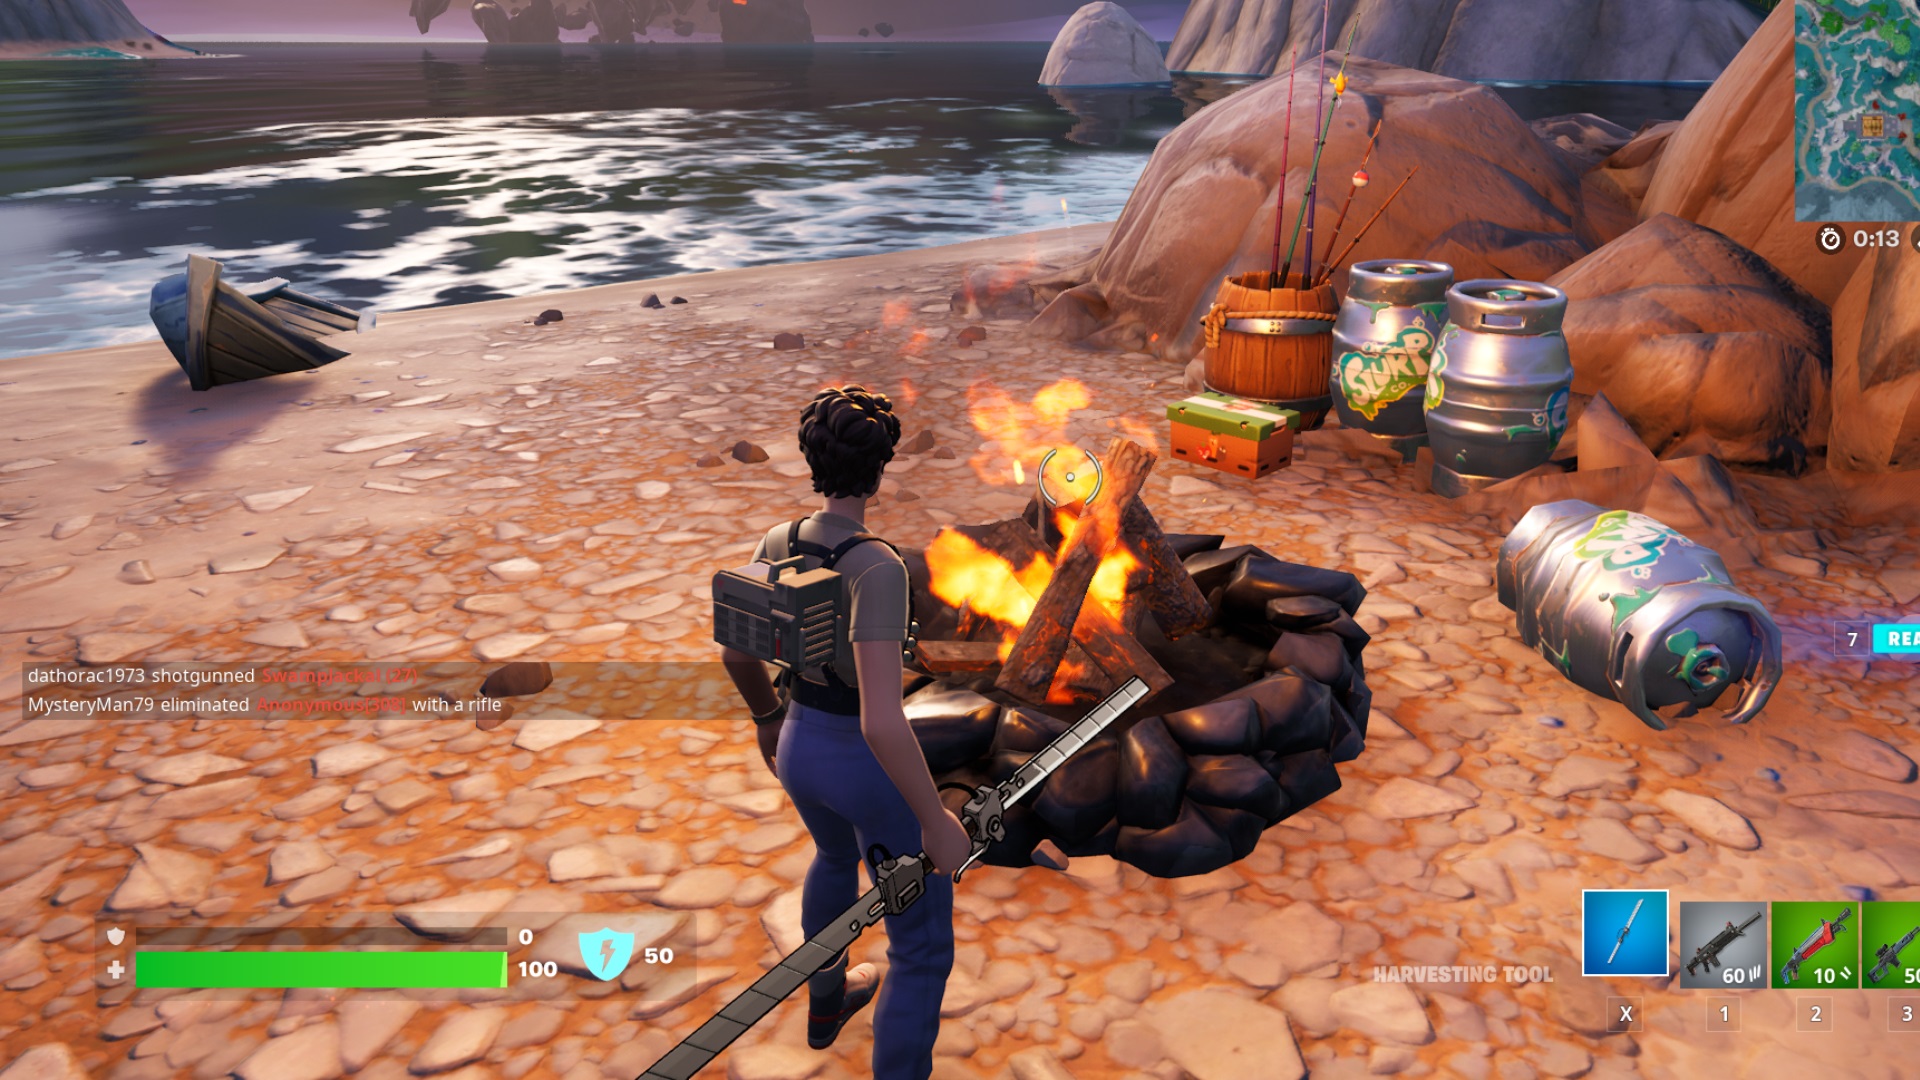  Where to find campfires in Fortnite 